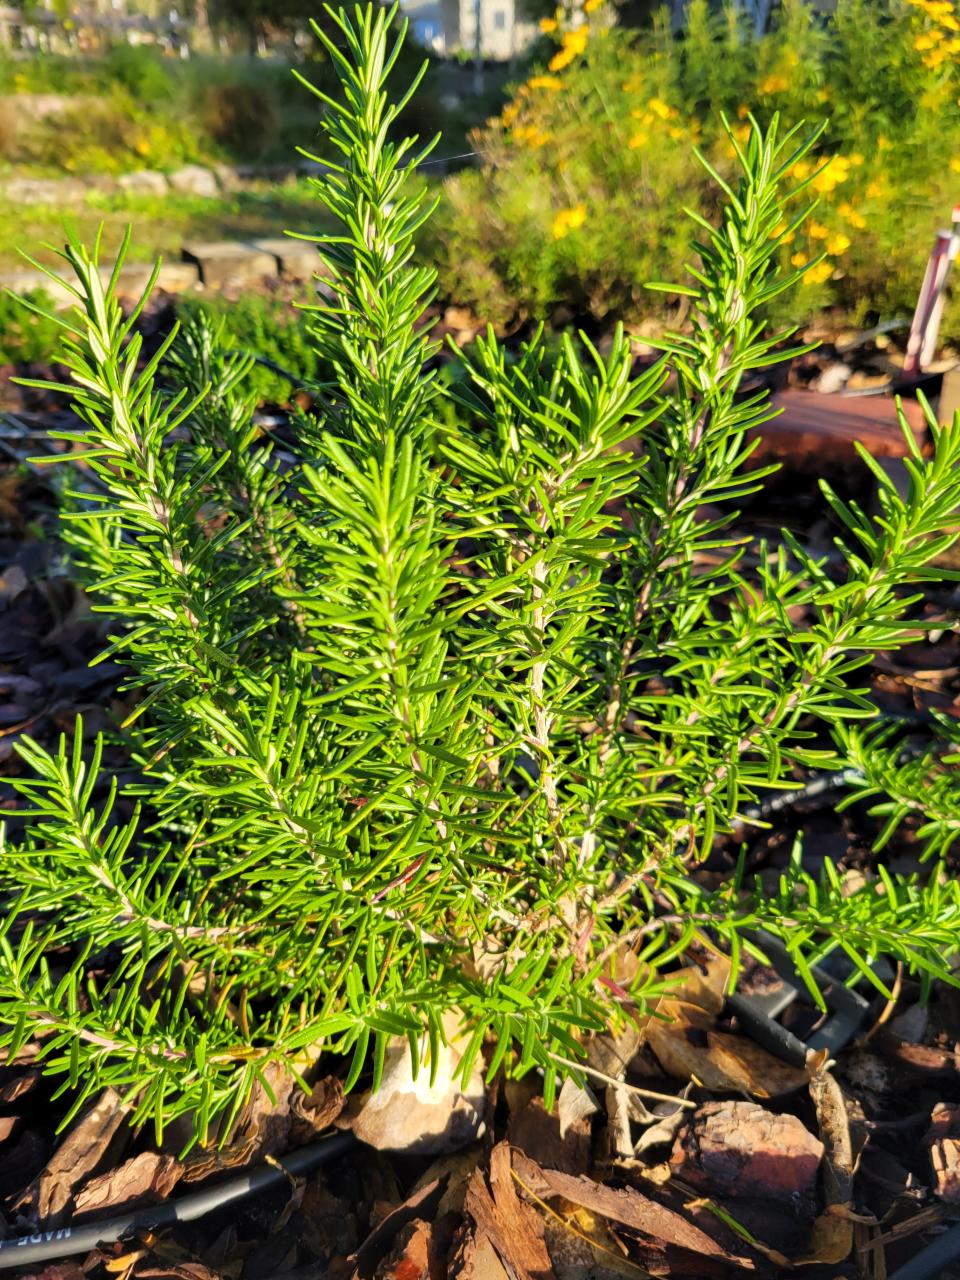 September is the perfect time to plant rosemary in your herb garden.